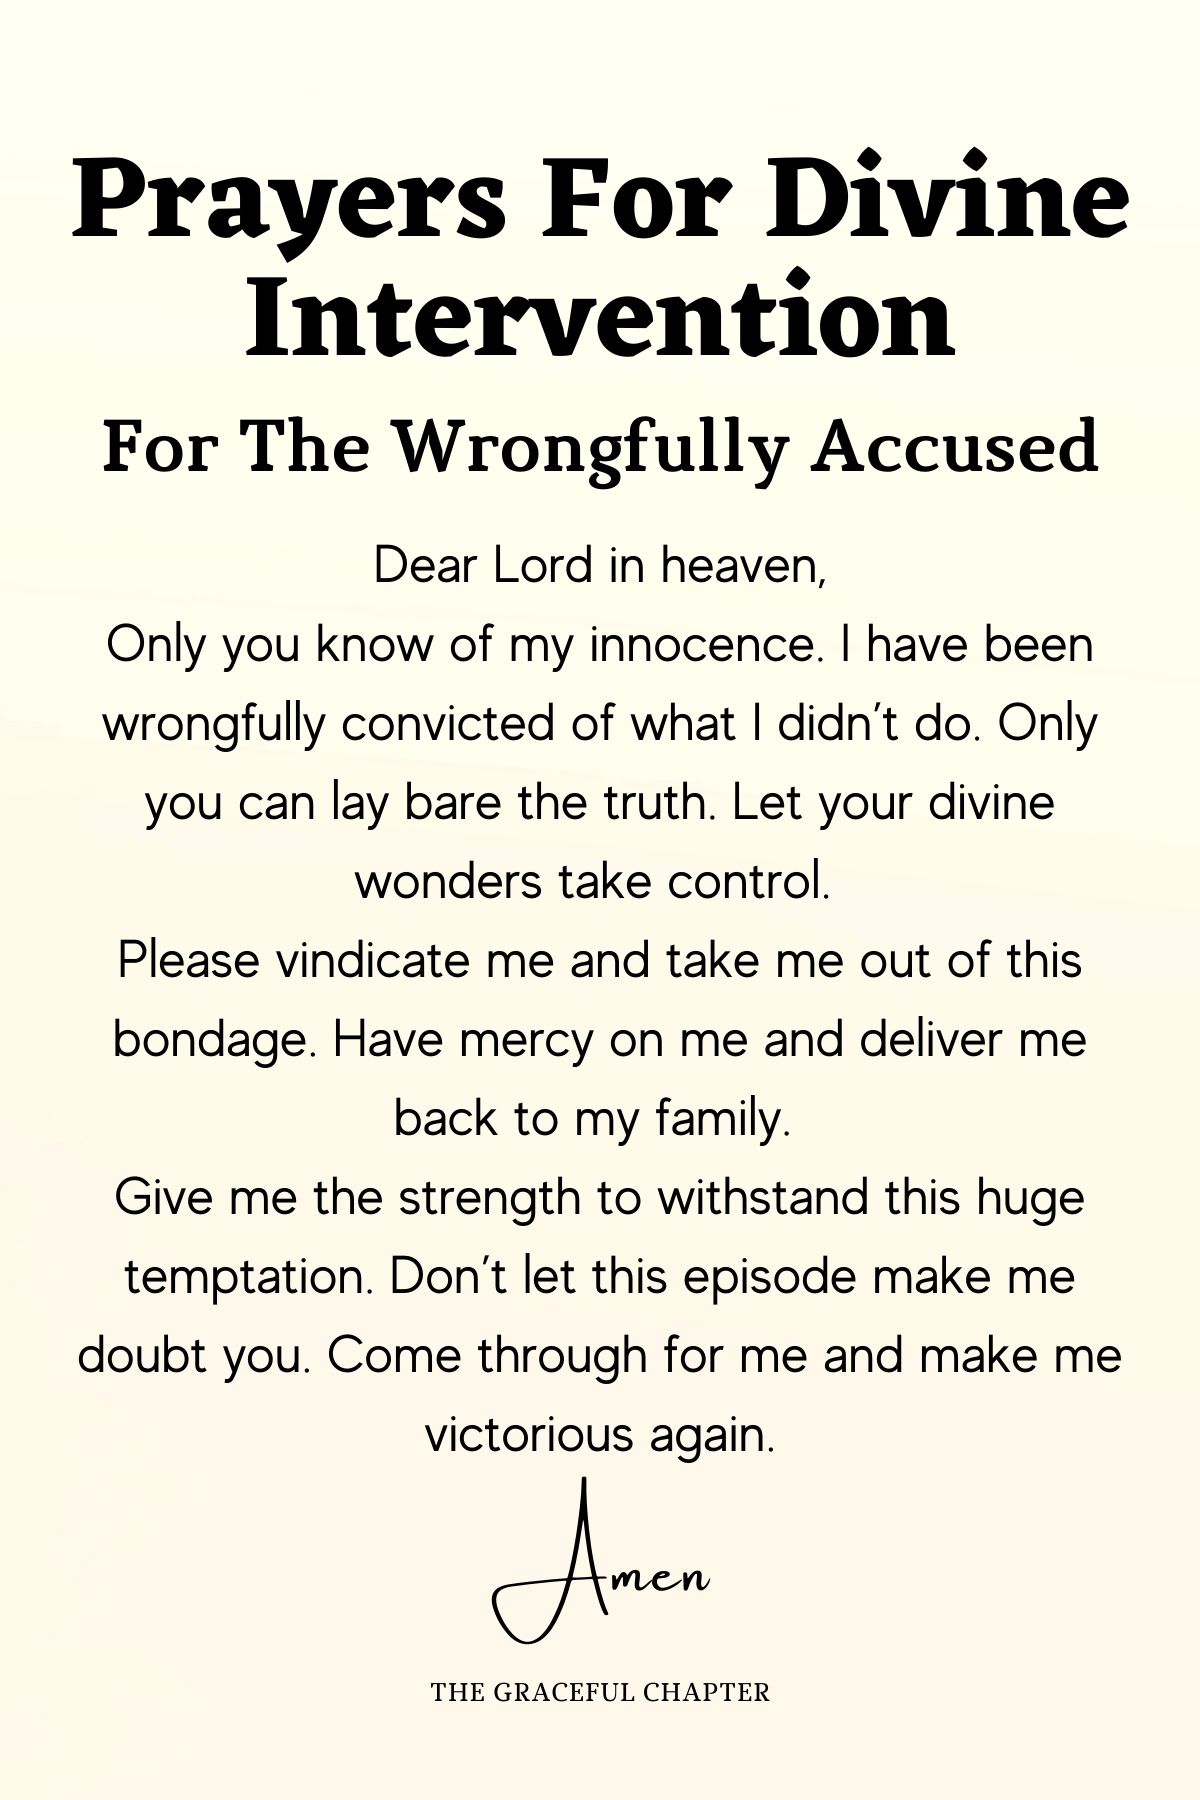 Prayer for divine intervention For the wrongfully accused